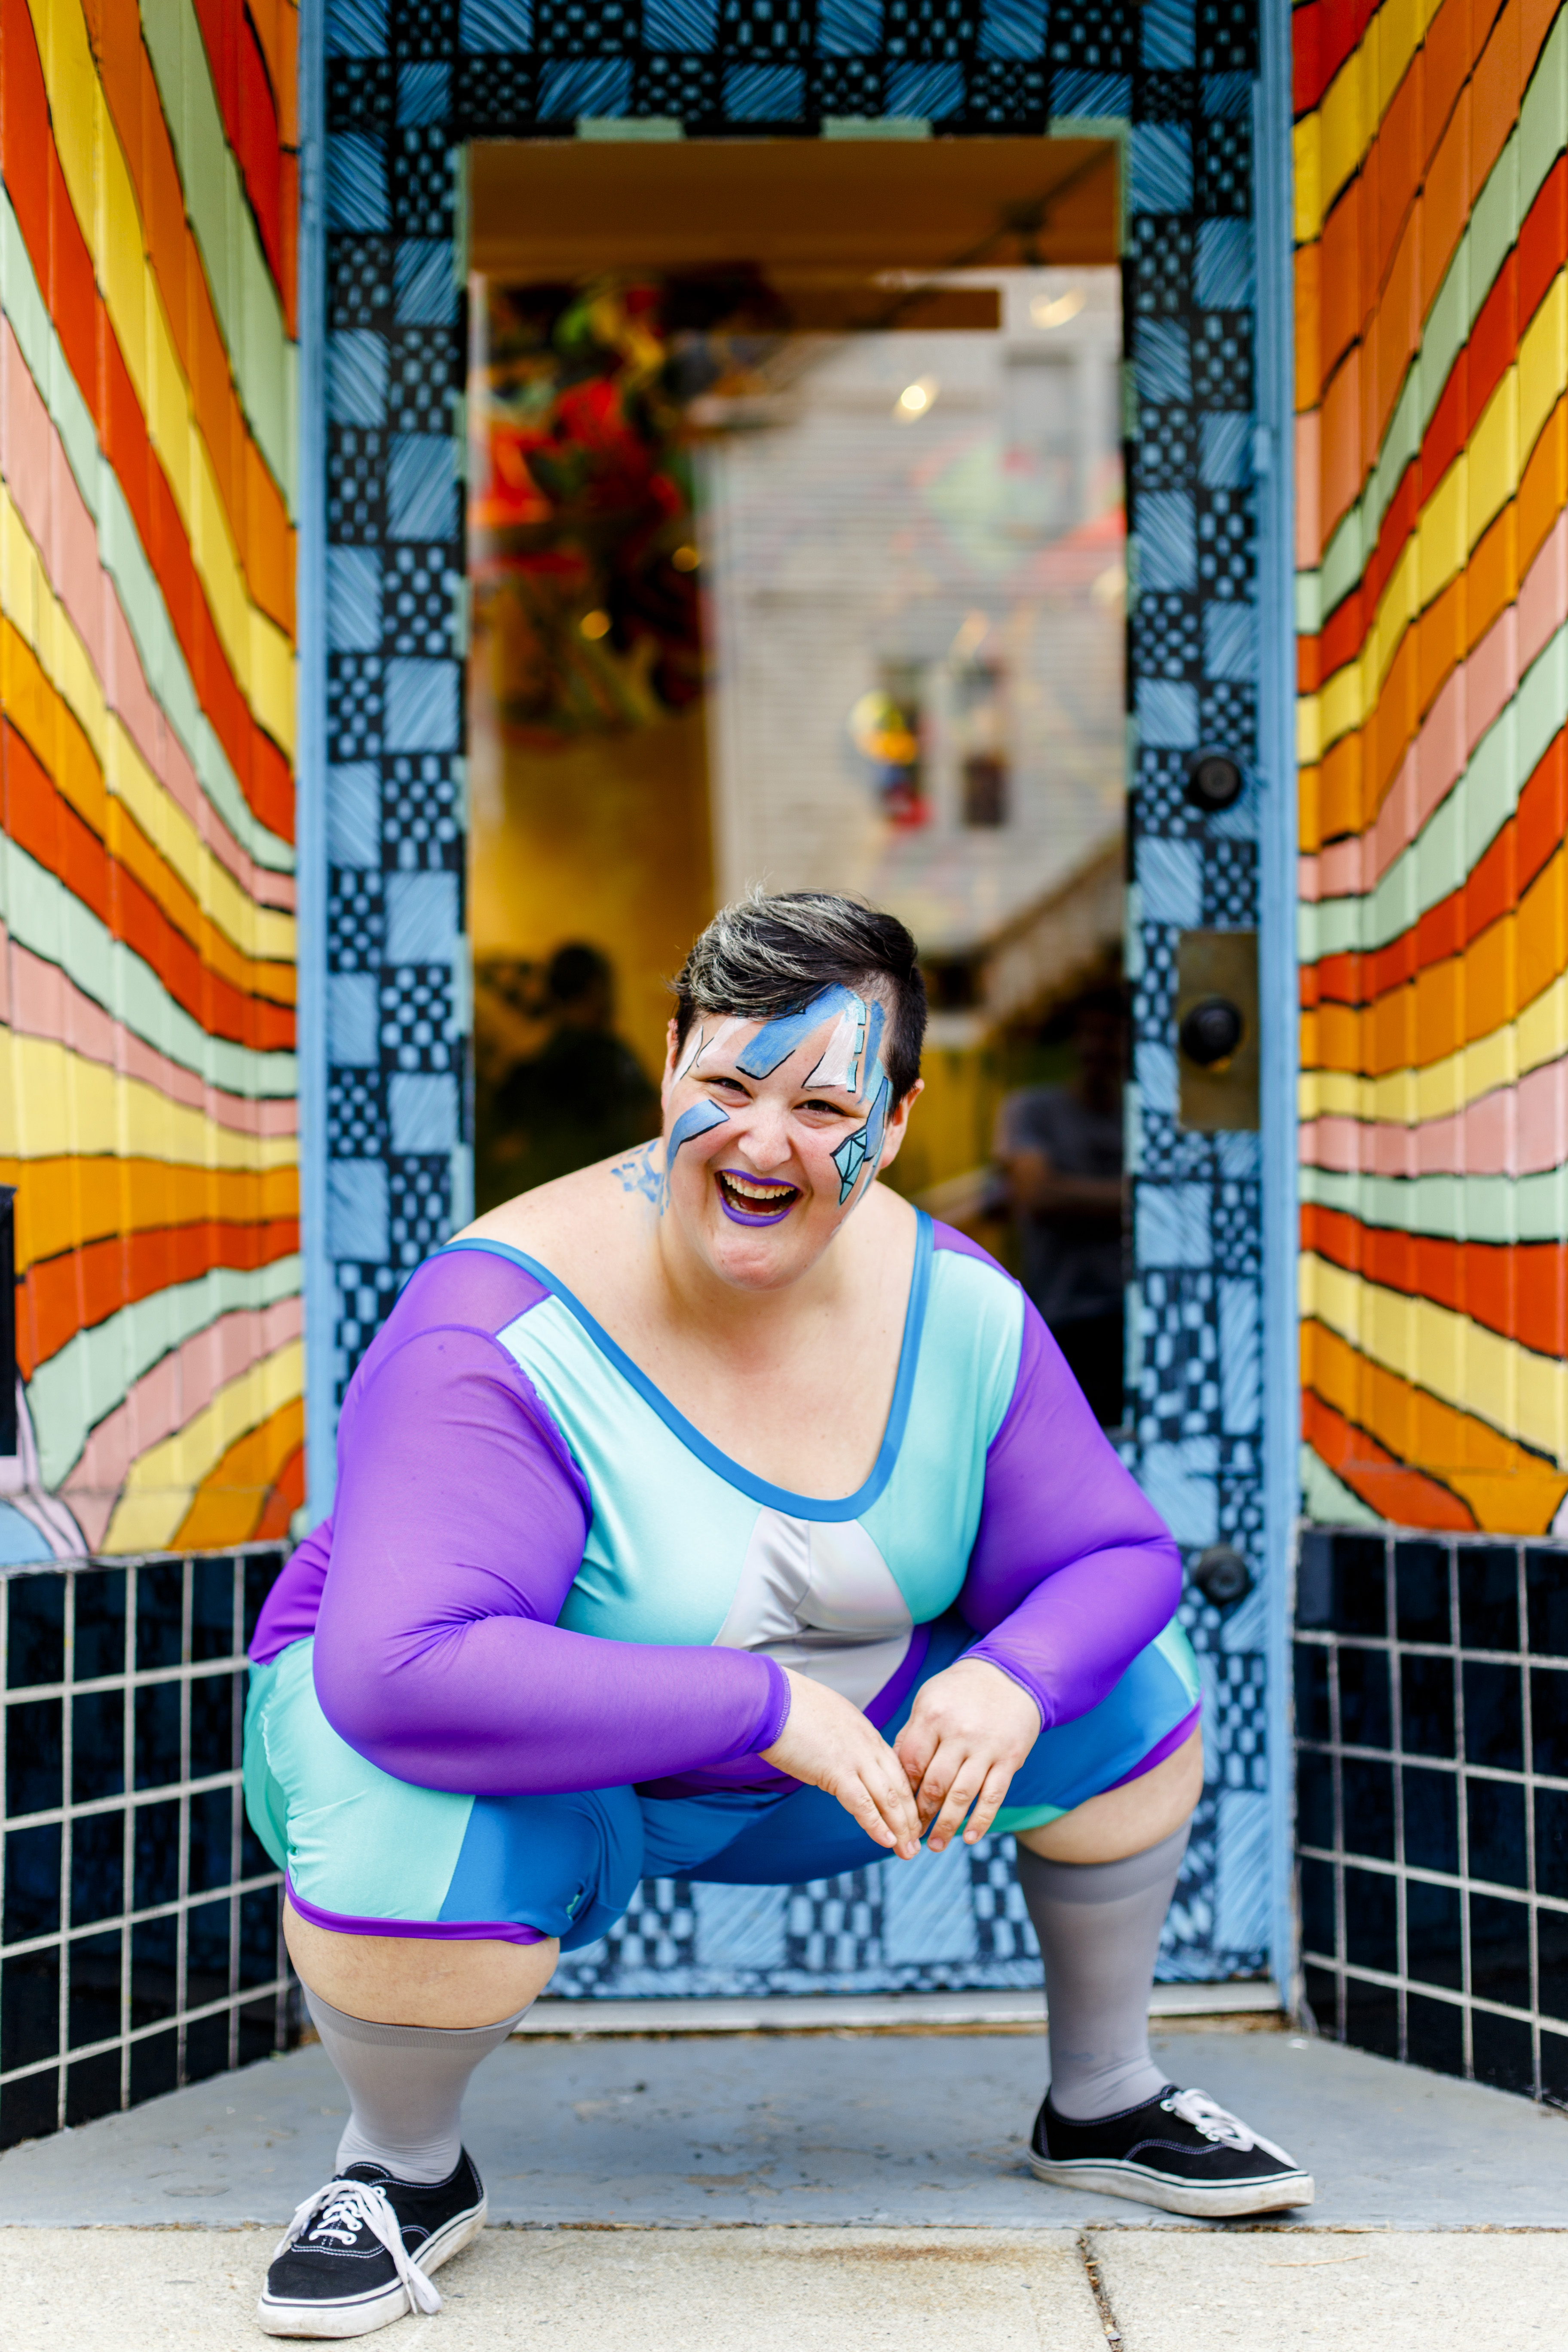 Sea Sprang squats down as they laugh in front of a doorway wearing a purple and blue geometric patterned piece with high socks and black sneakers. Photo credit Grace DuVal.